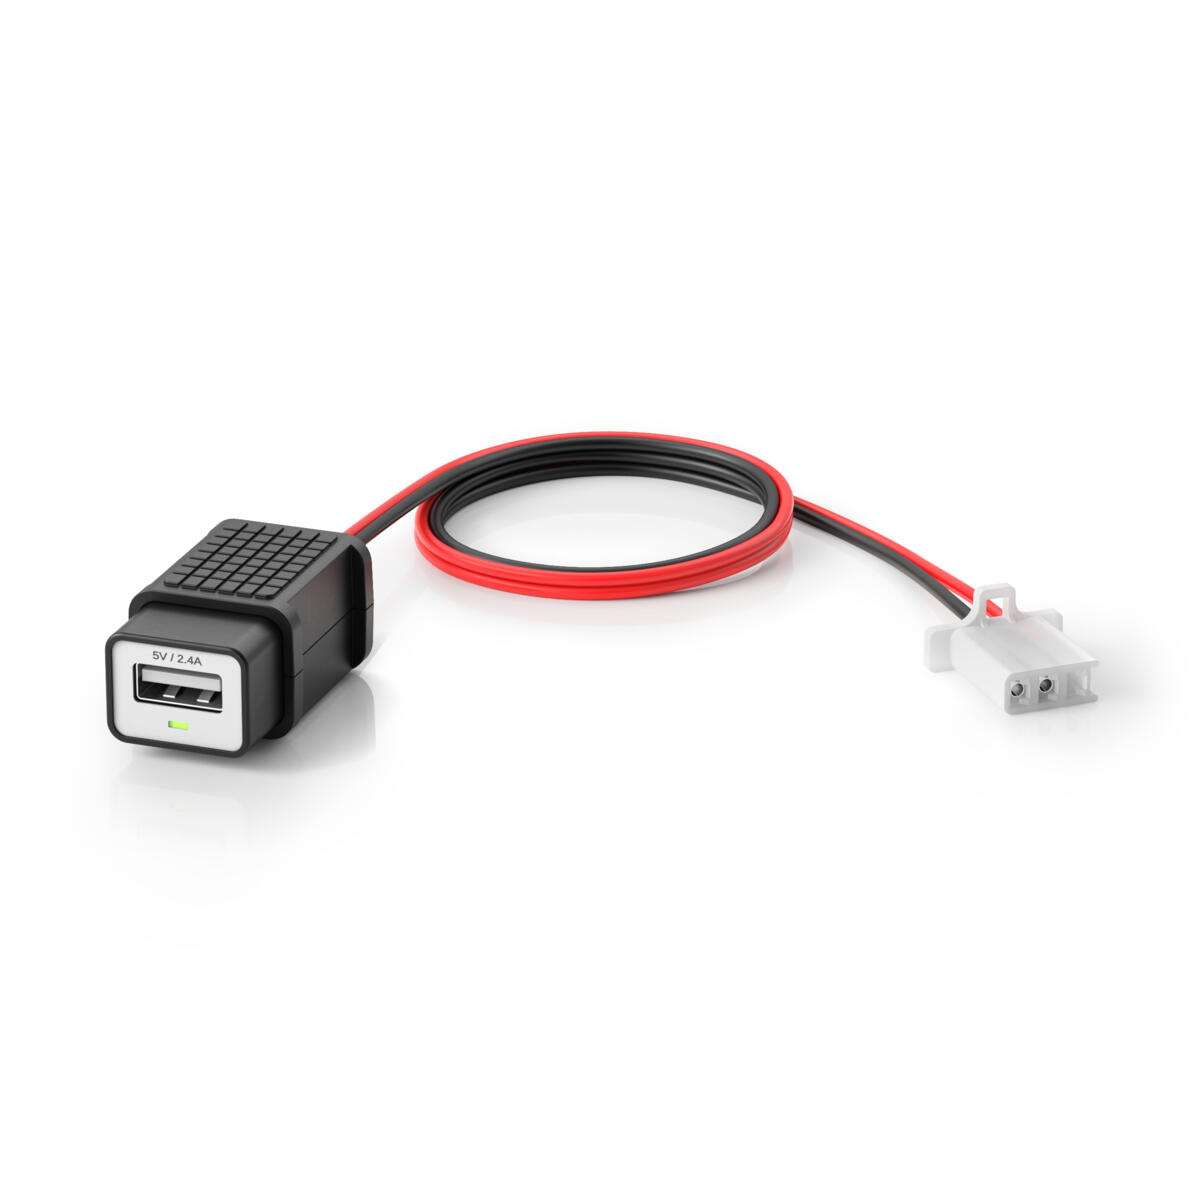 USB 5-Volt outlet kit for pre-wired units